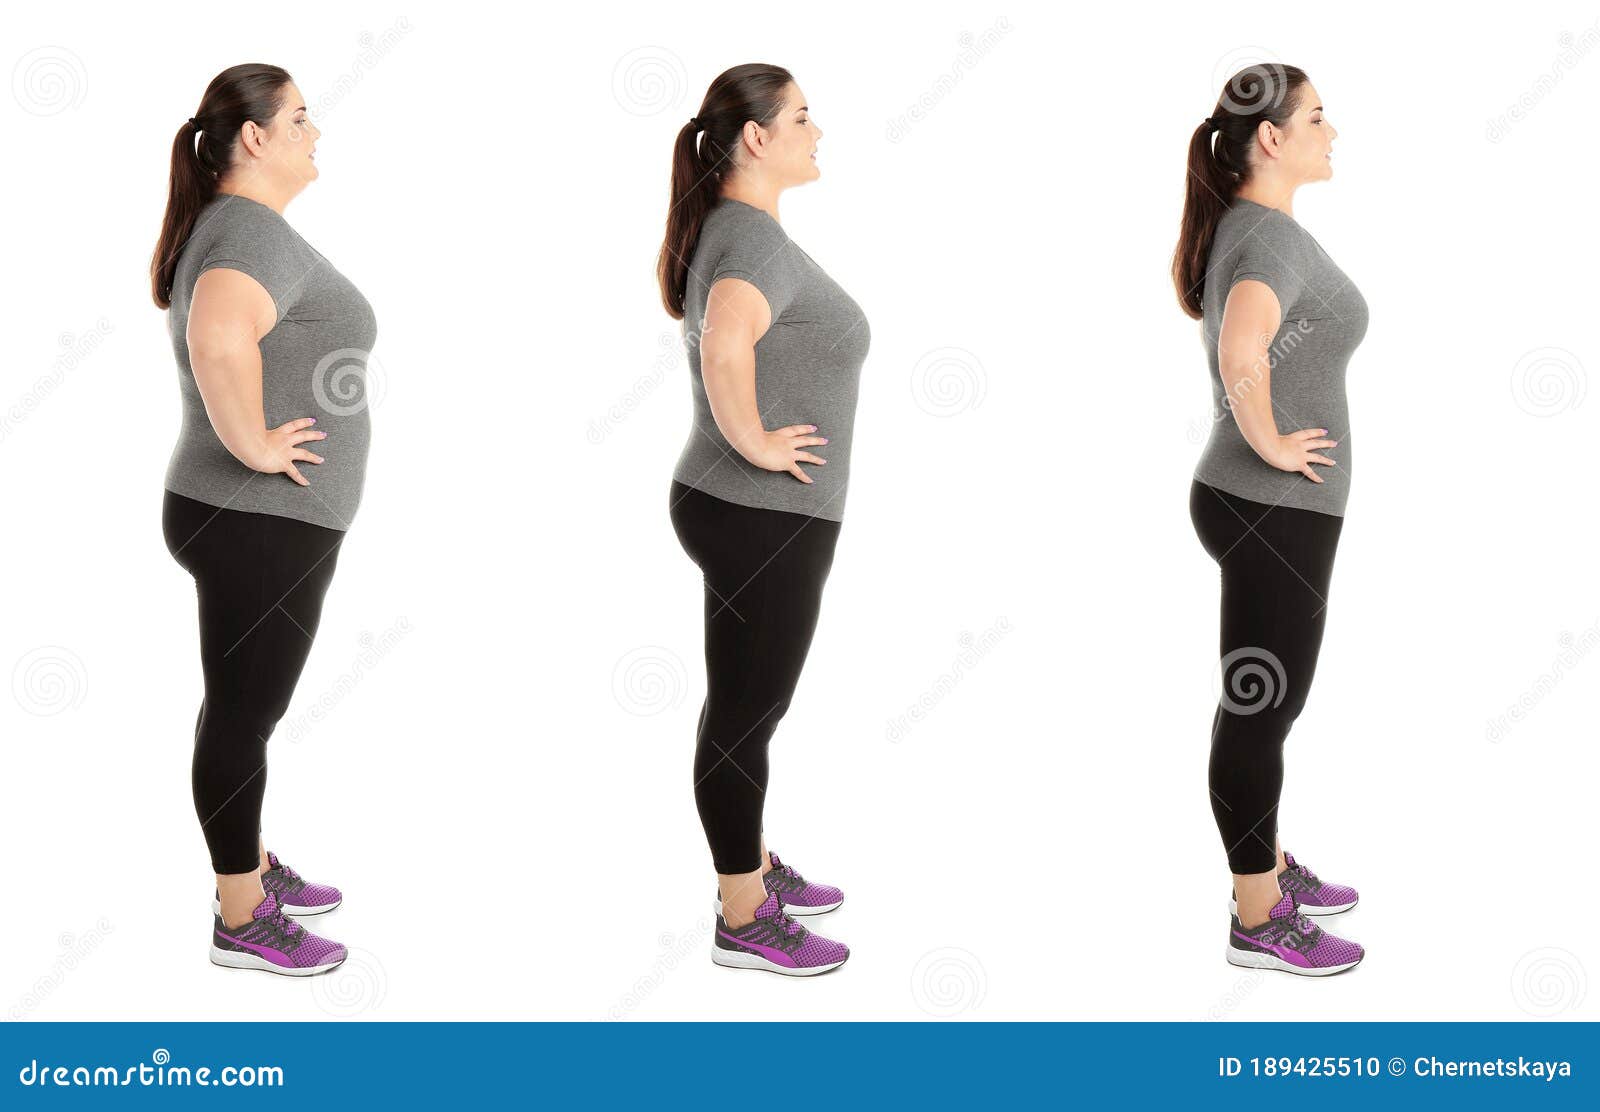 Collage with Photos of Overweight Woman before and after Weight Loss on ...